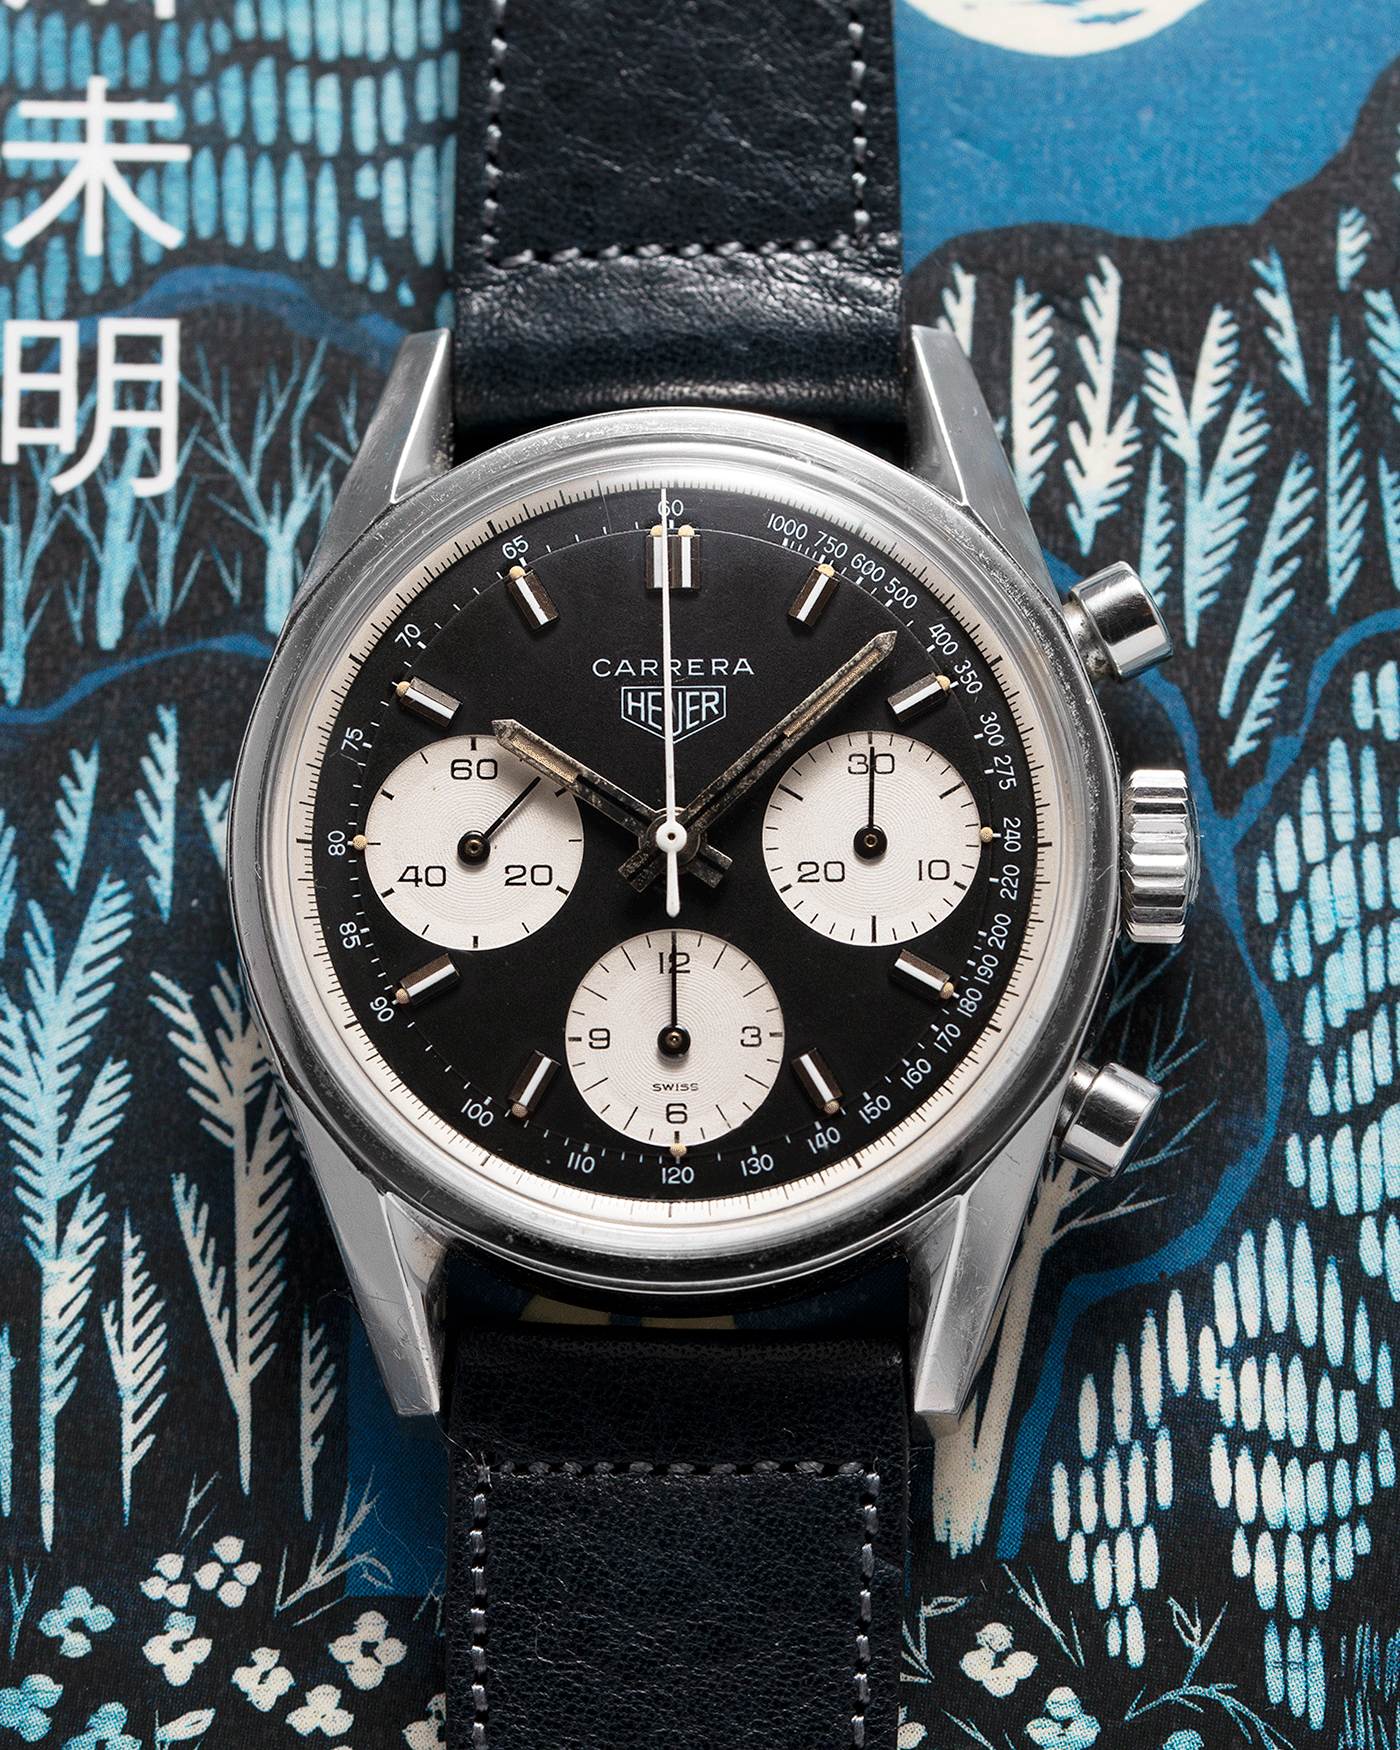 Brand: Heuer Year: 1960’s Model: Carrera Reference Number: 2447NST Material: Stainless Steel Movement: Valjoux 72 Case Diameter: 36mm Lug Width: 18mm Bracelet/Strap: Accurate Form Navy Blue Calf